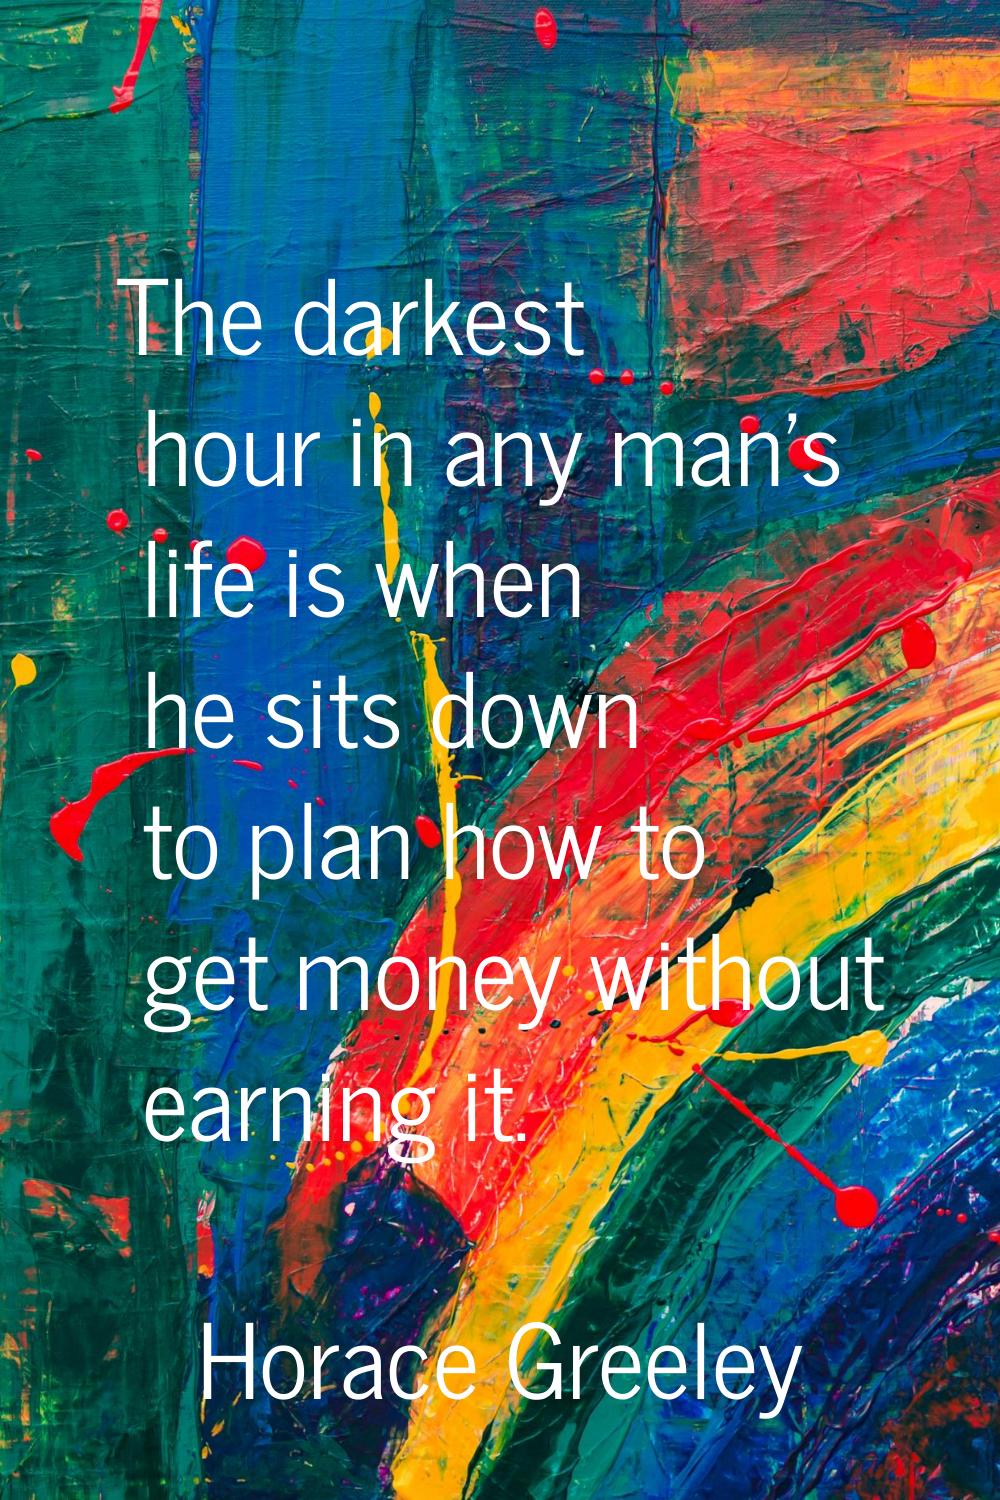 The darkest hour in any man's life is when he sits down to plan how to get money without earning it